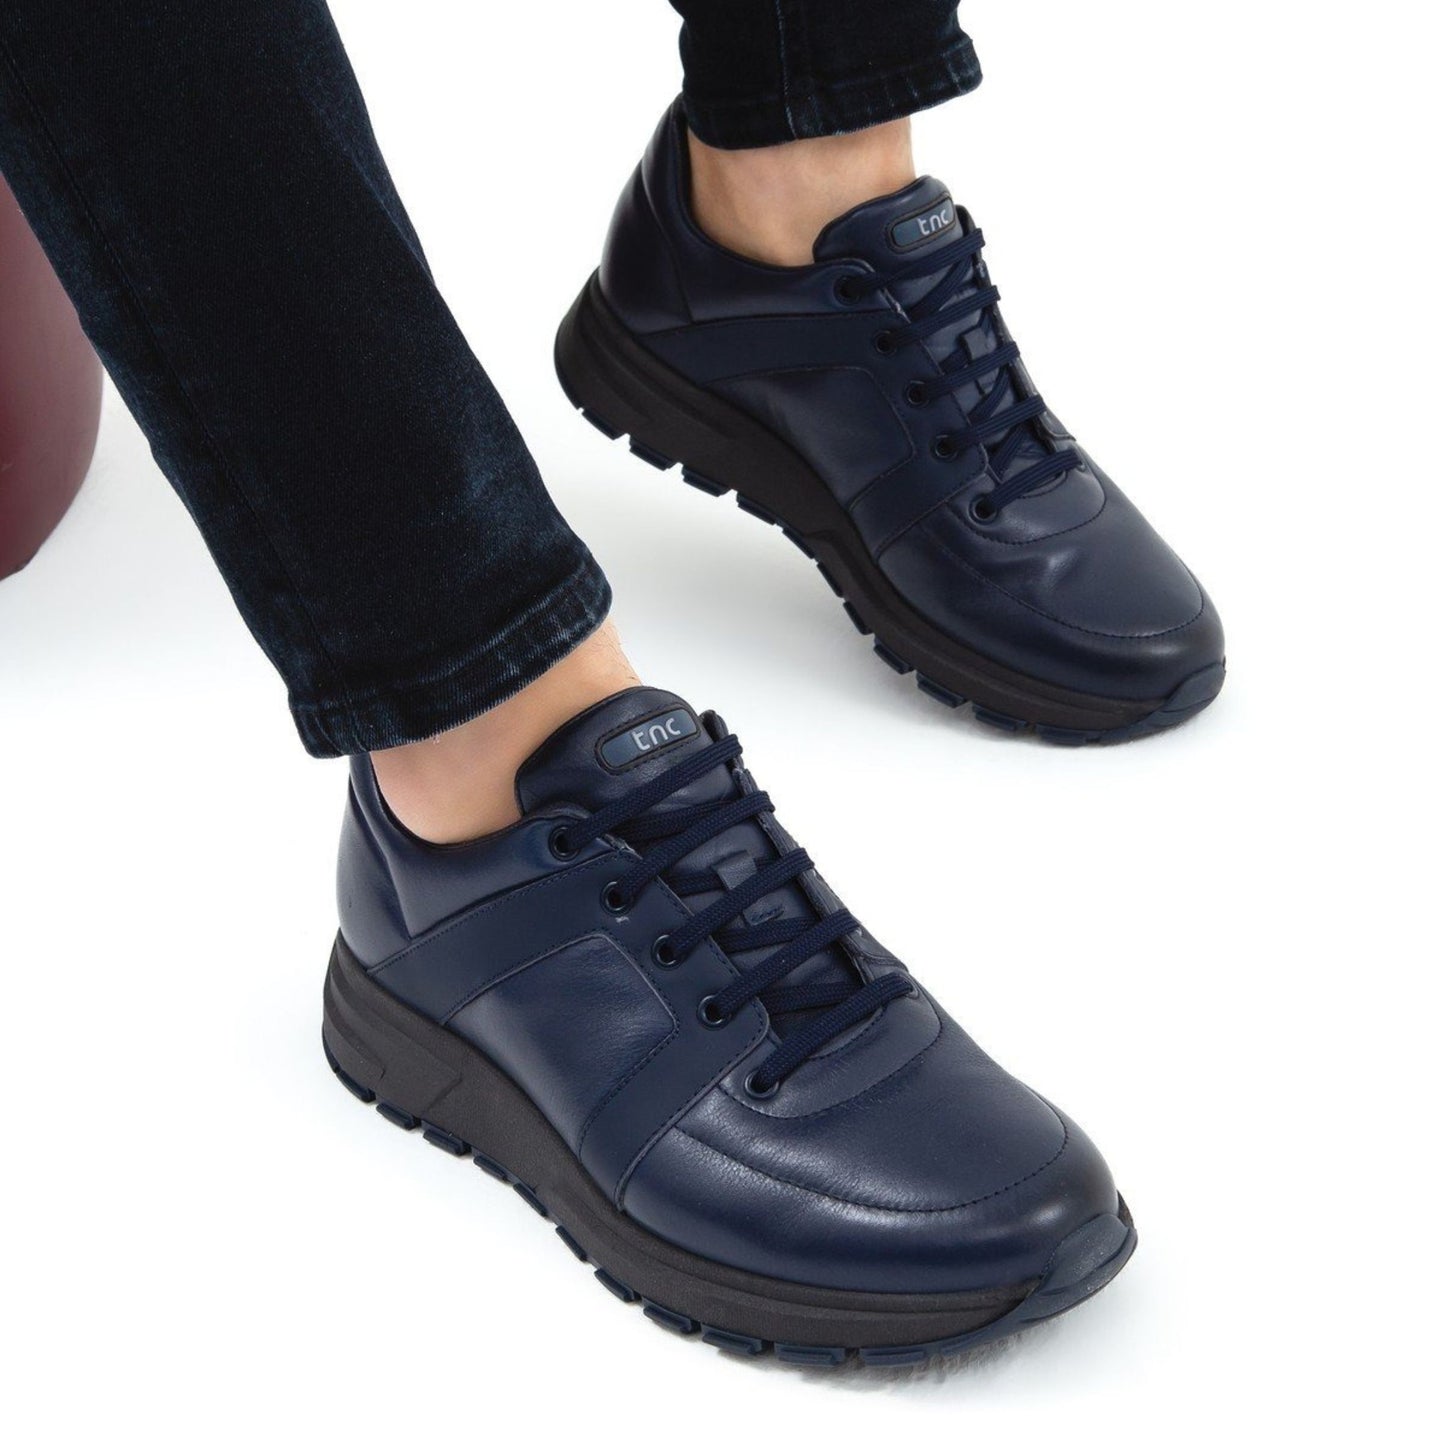 Madasat Navy Blue Leather Casual Shoes - 590 |